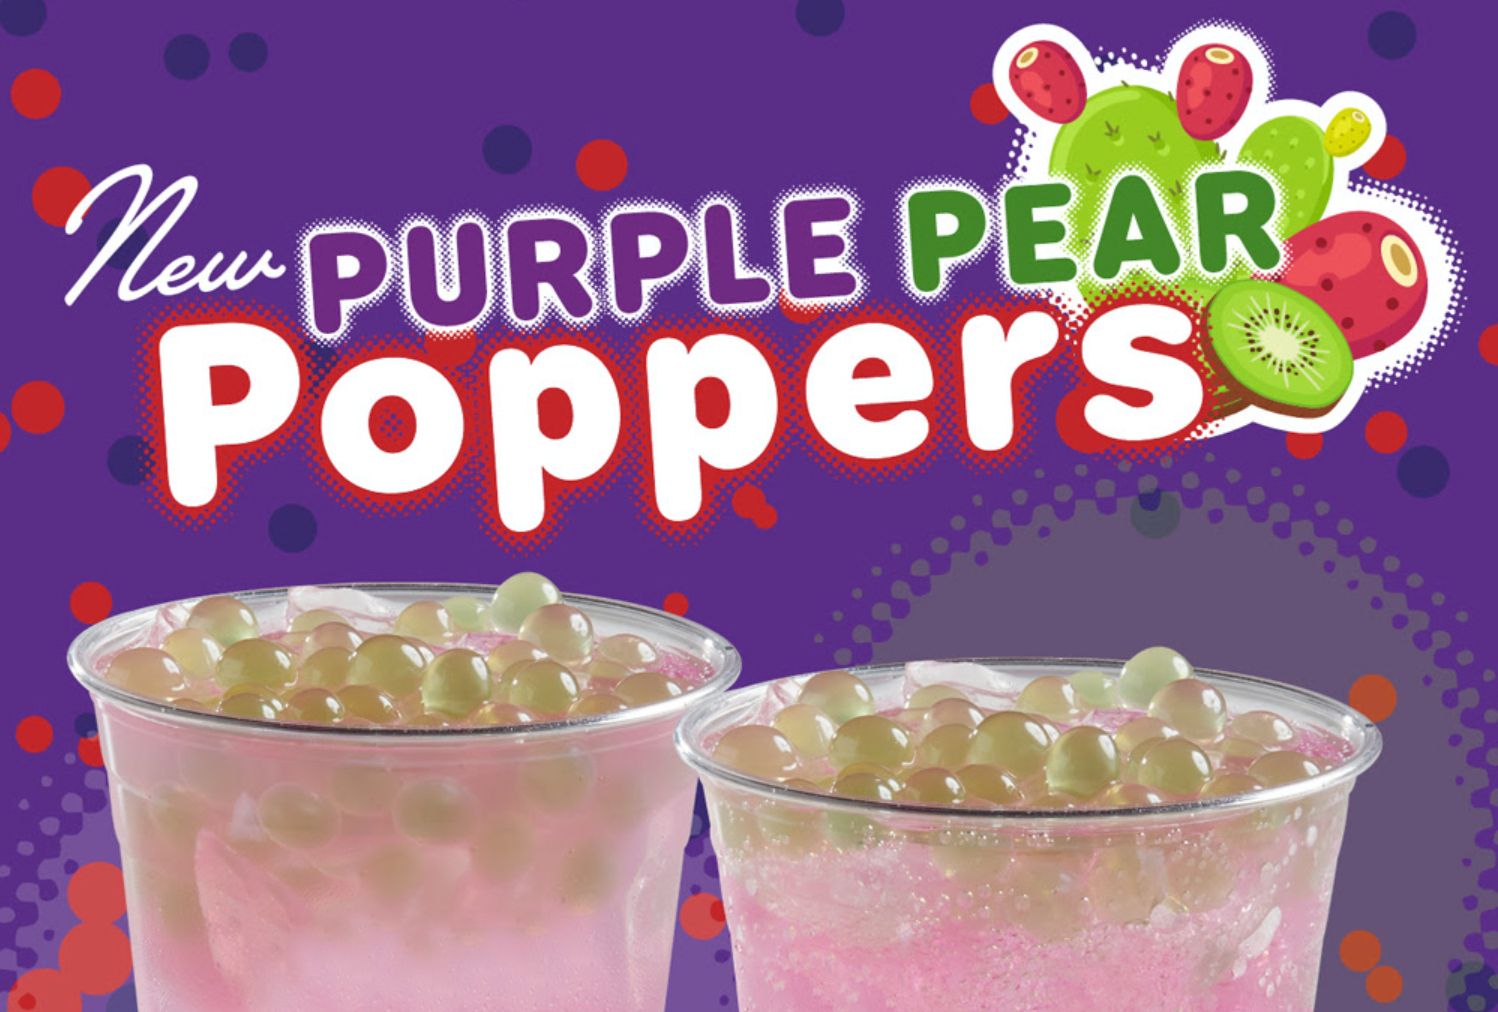 New Icy and Refreshing Purple Pear Poppers are Now Offered at Del Taco